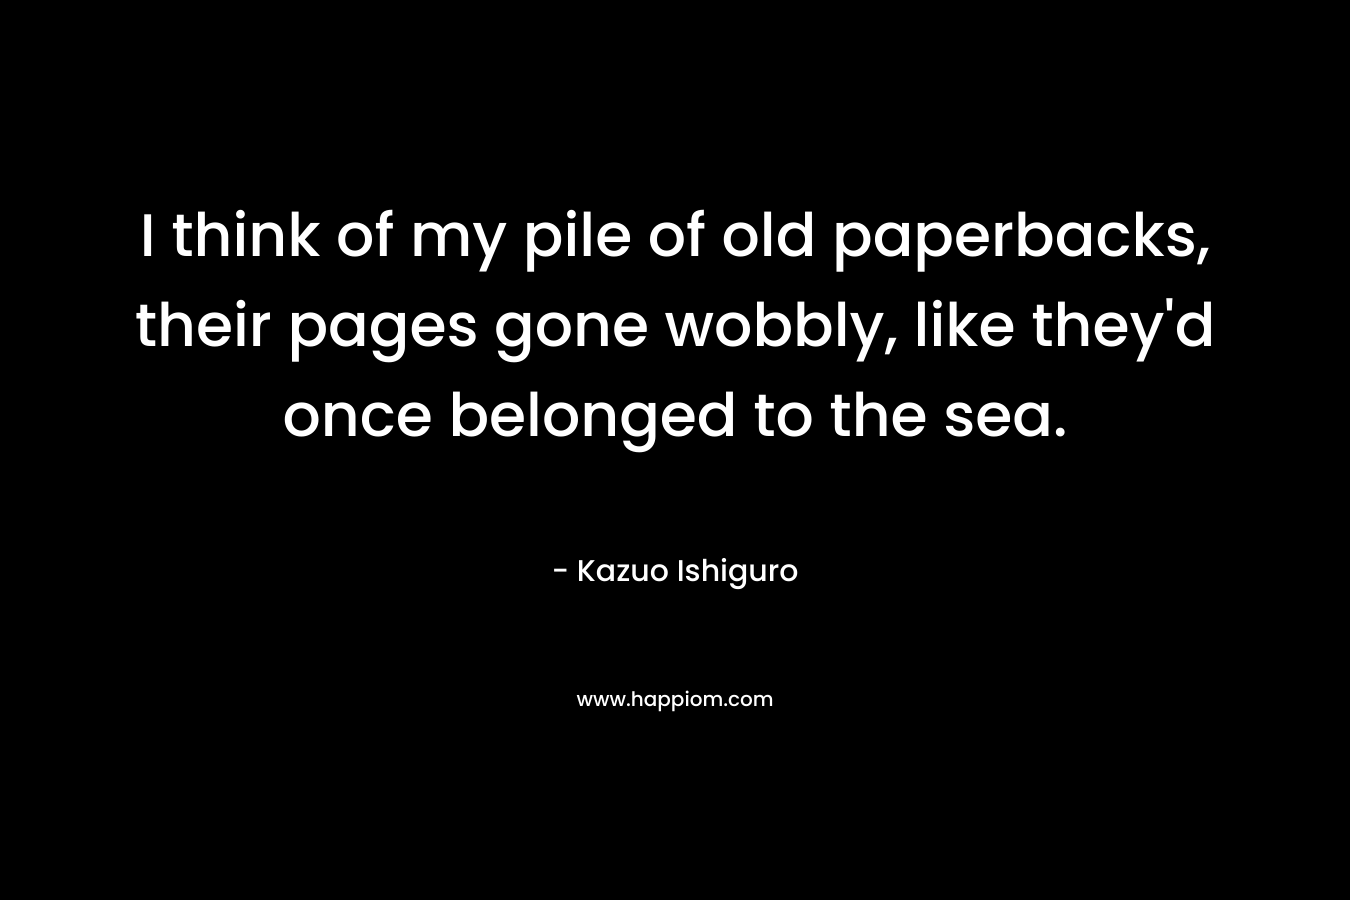 I think of my pile of old paperbacks, their pages gone wobbly, like they’d once belonged to the sea. – Kazuo Ishiguro